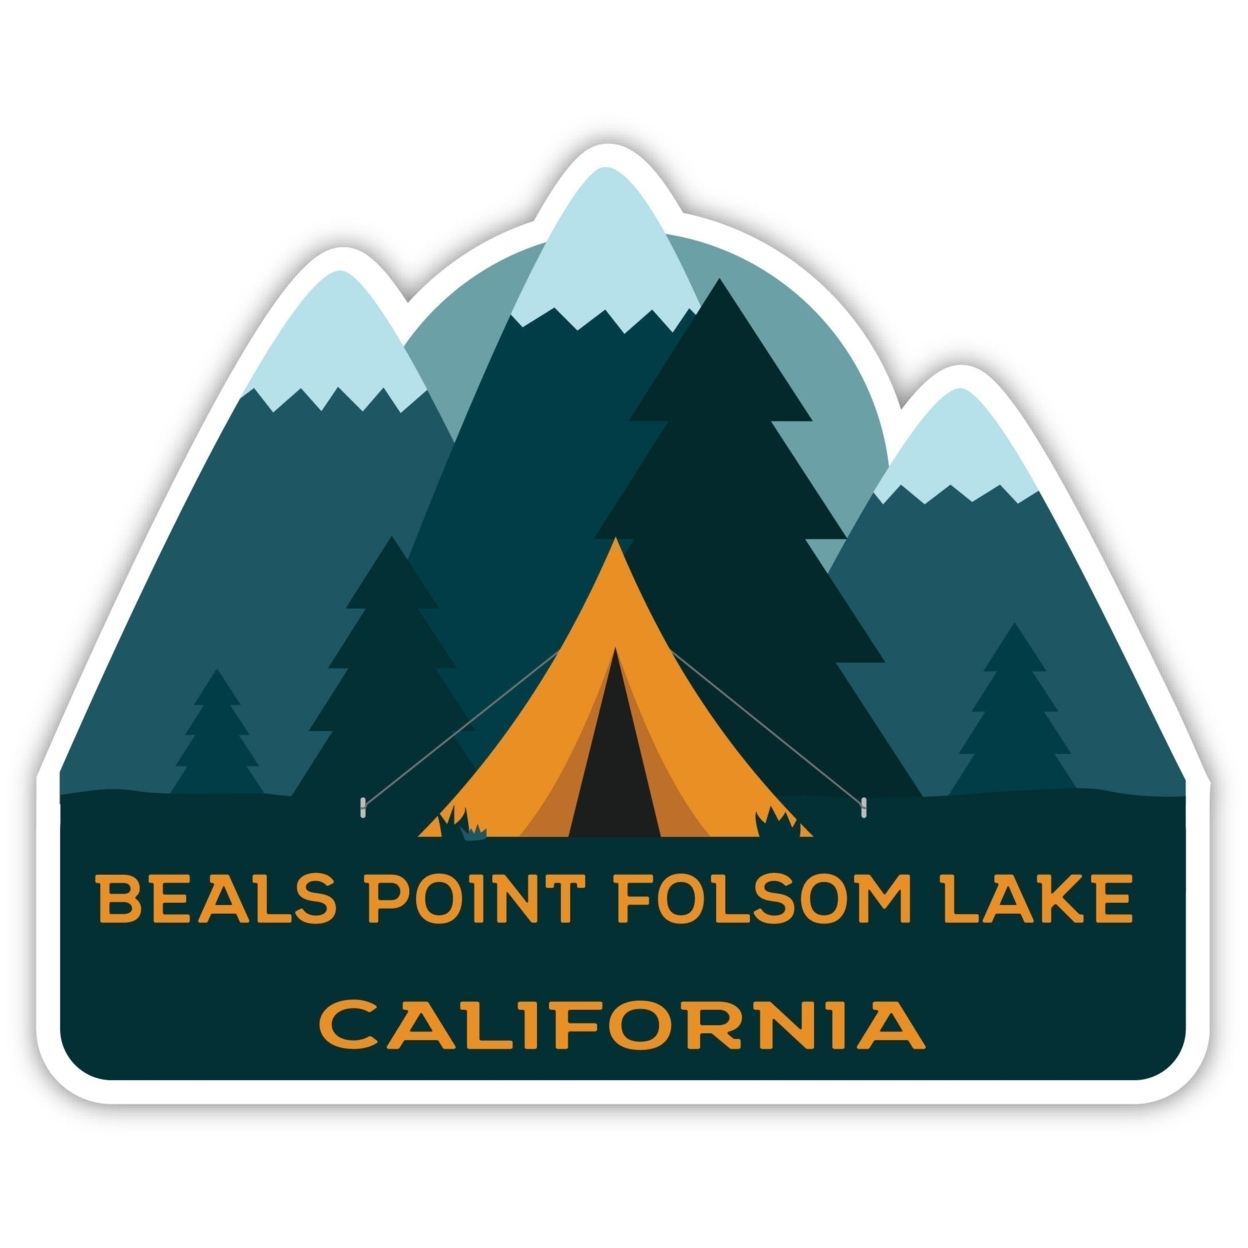 Beals Point Folsom Lake California Souvenir Decorative Stickers (Choose Theme And Size) - 4-Pack, 12-Inch, Tent